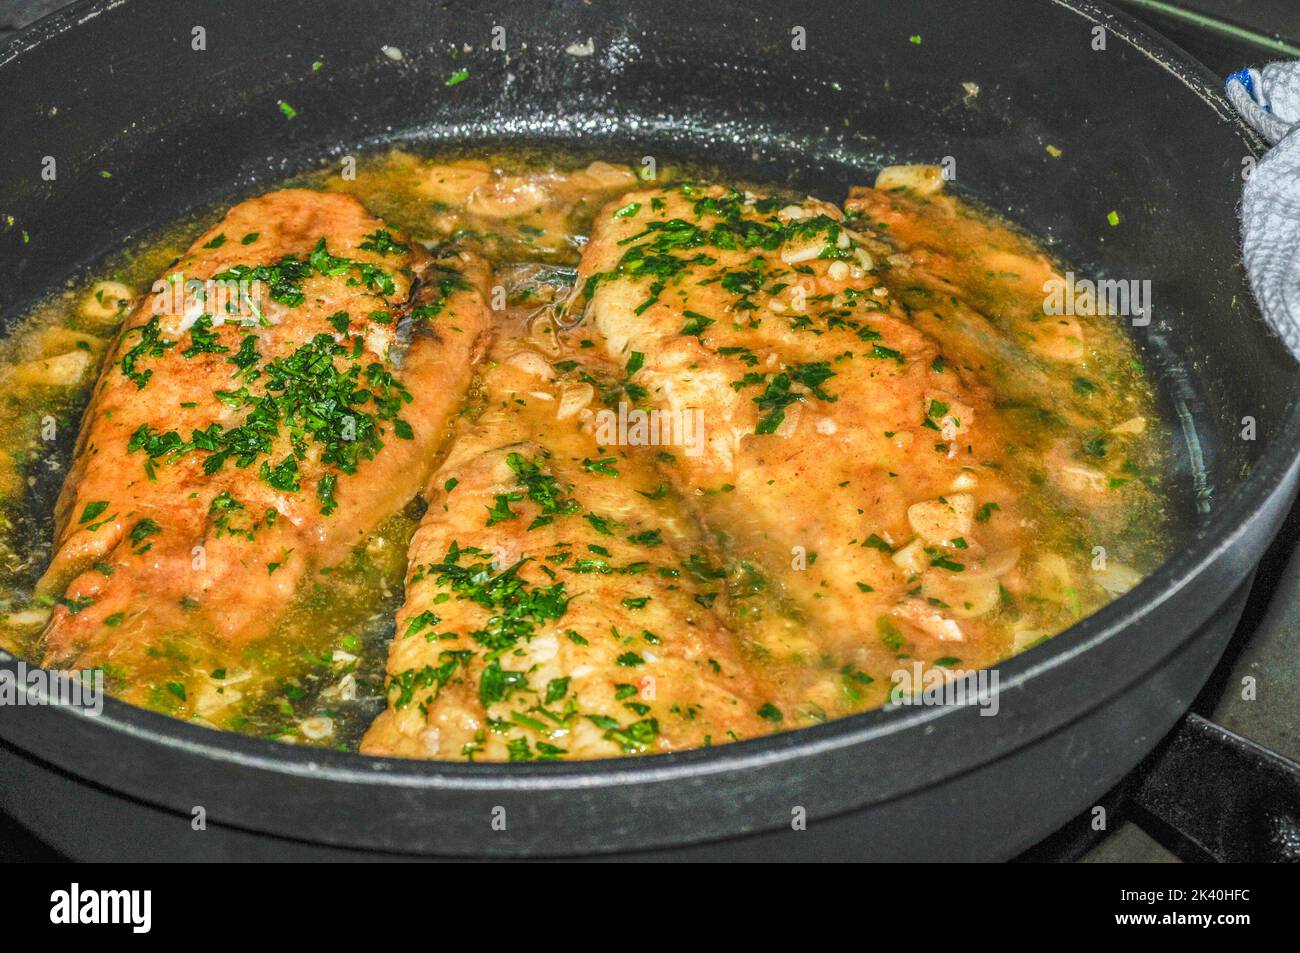 Sole meuniere with parsley and lemon. Stock Photo